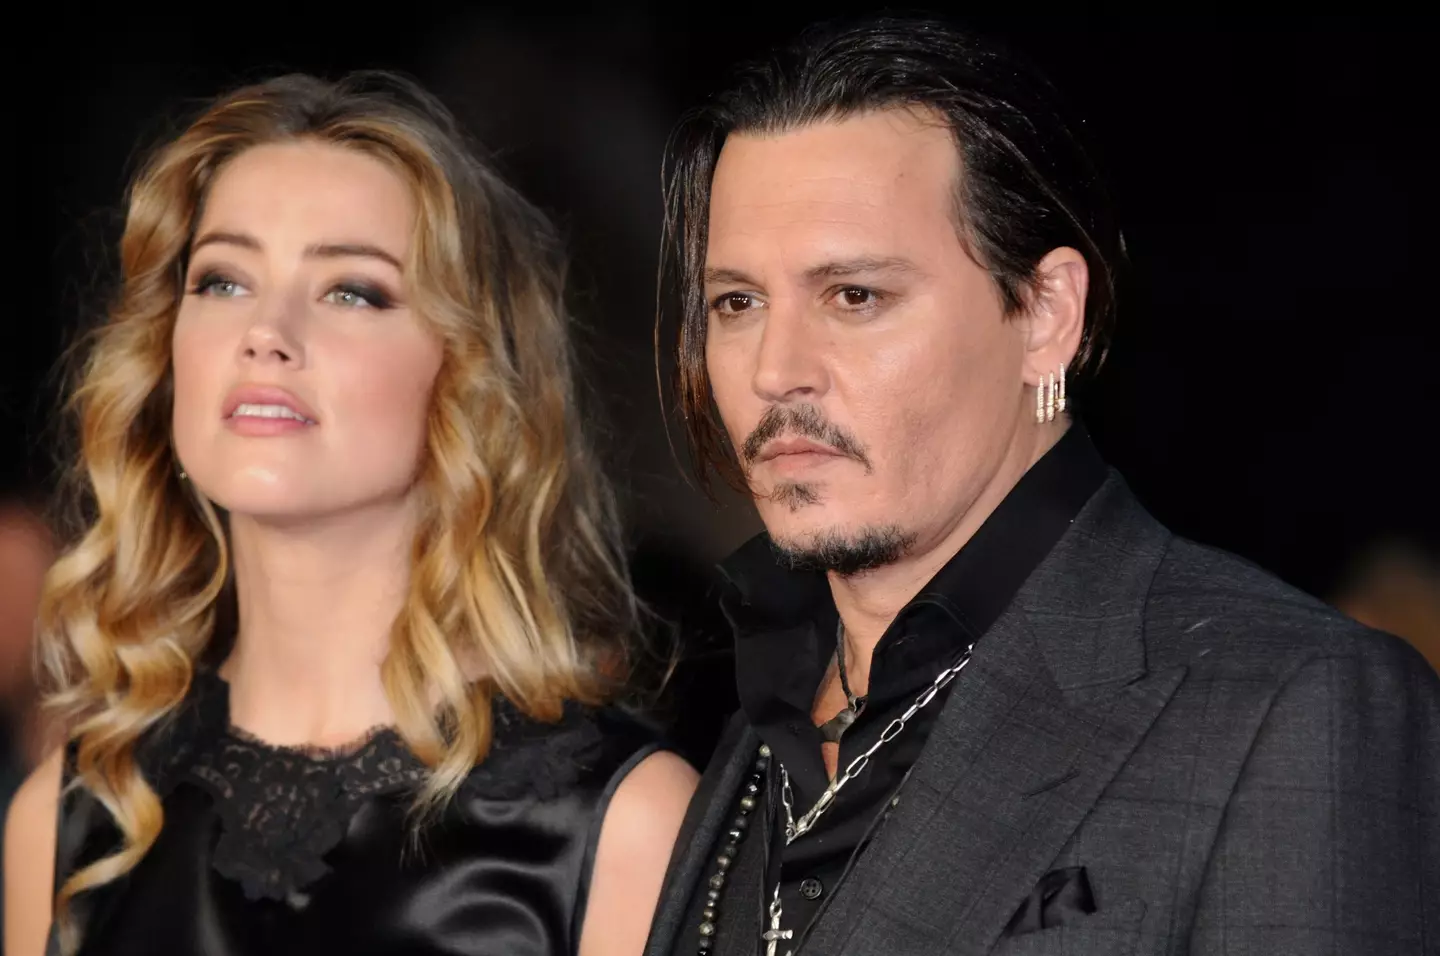 Johnny Depp and Amber Heard at the BFI London Film Festival for 'Black Mass'.